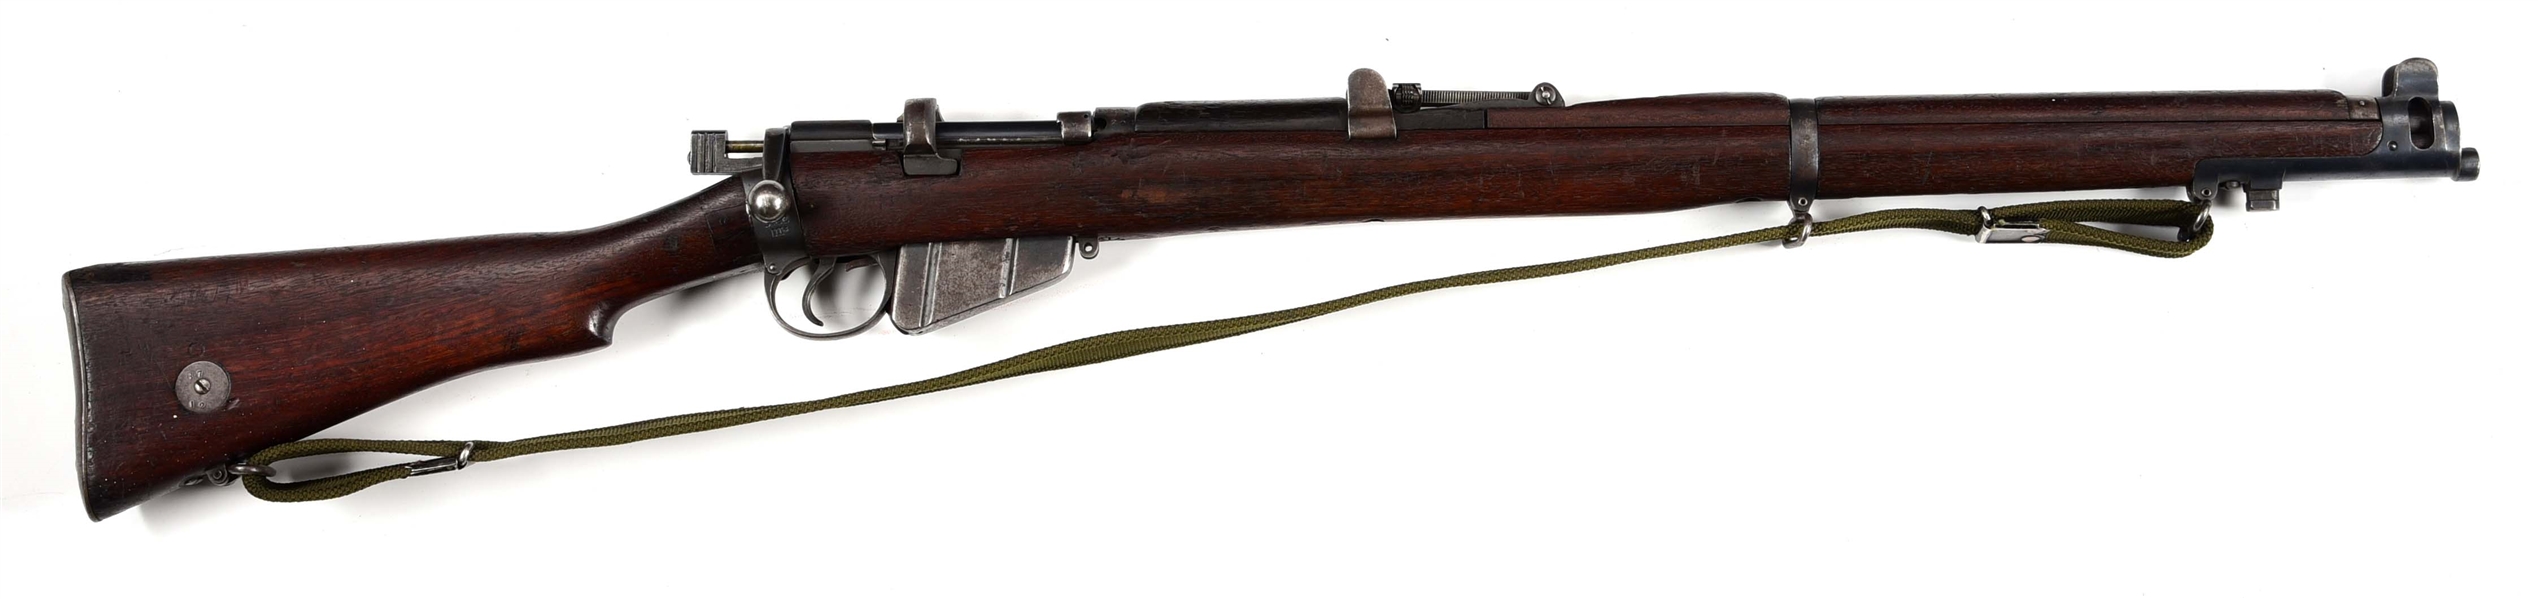 (C) ENFIELD SMLE III* BOLT ACTION RIFLE.